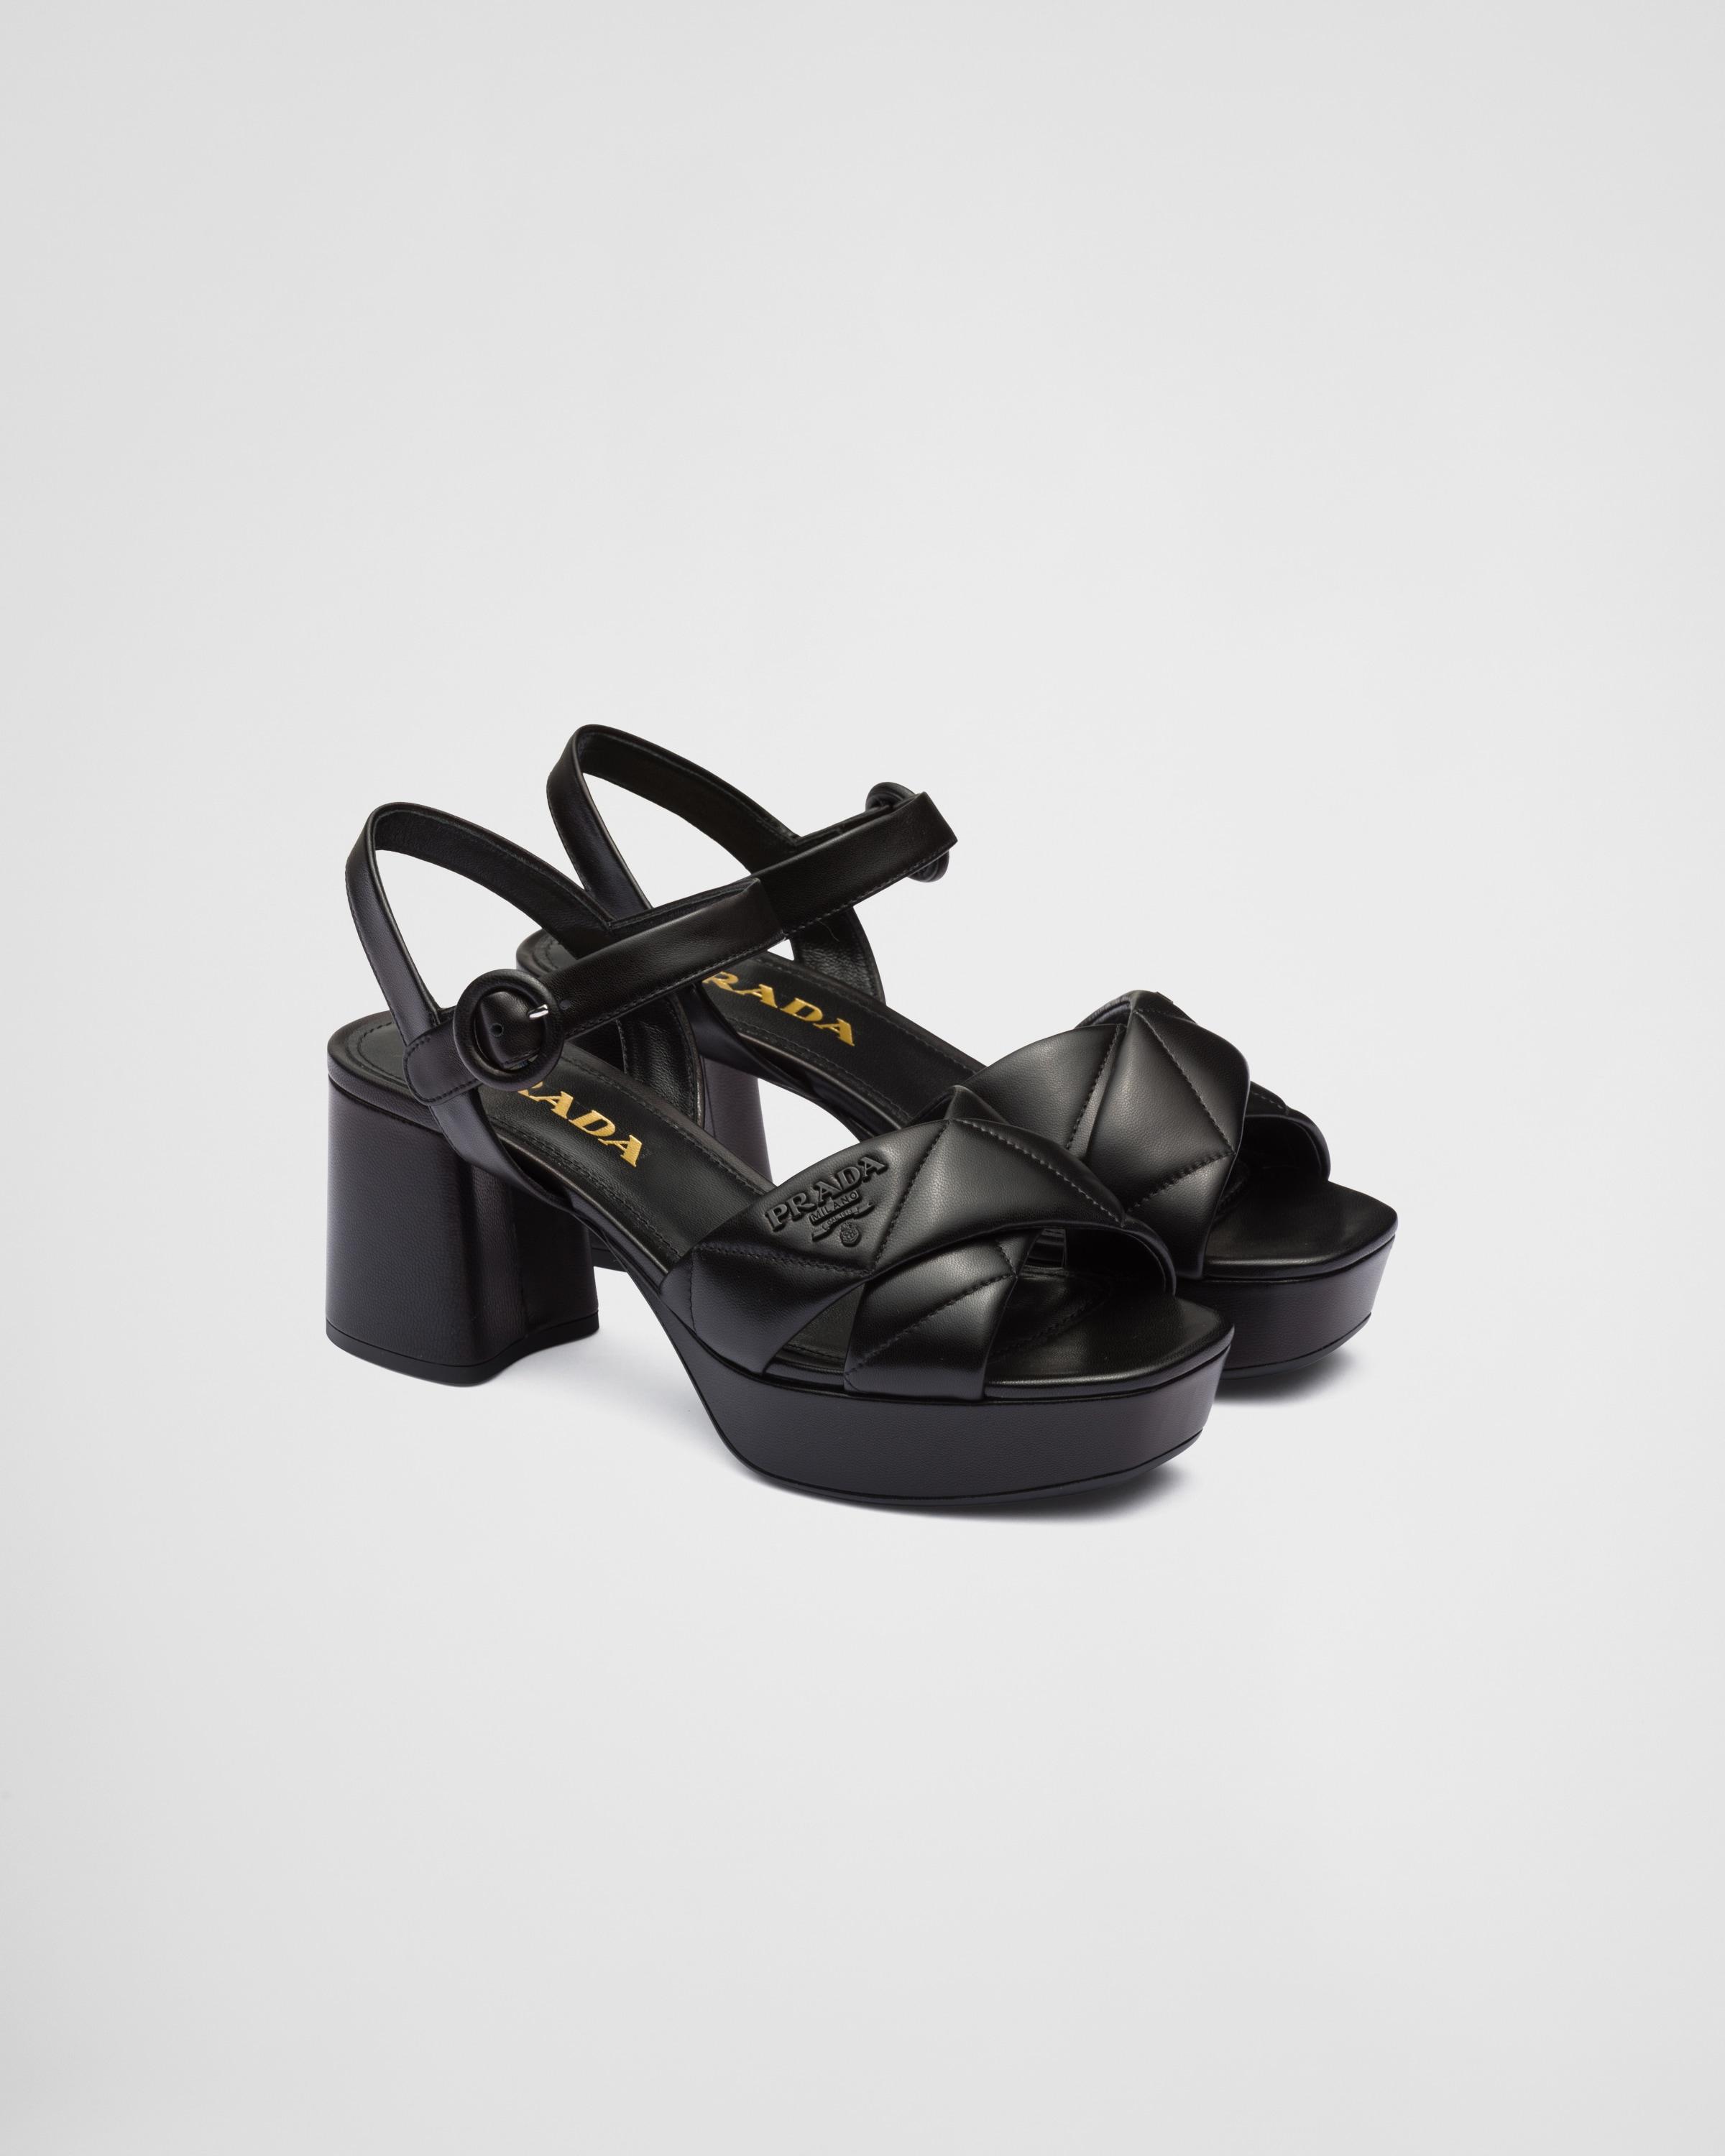 Prada Quilted Nappa Leather Platform Sandals in Black | Lyst